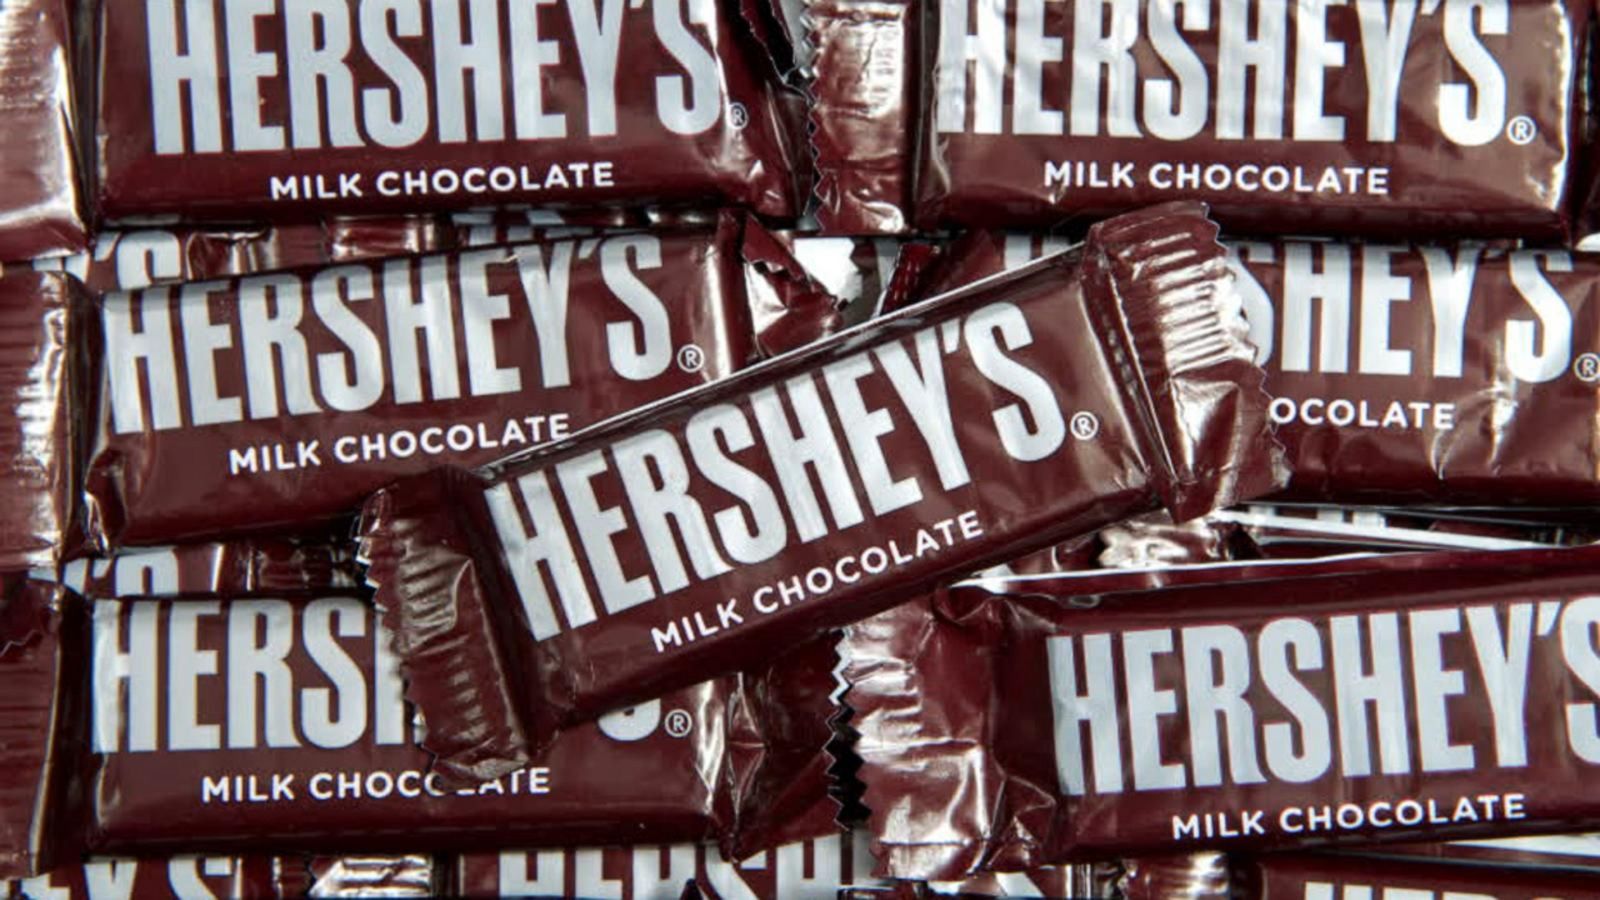 Hershey’s invests in cocoa production in Chiapas